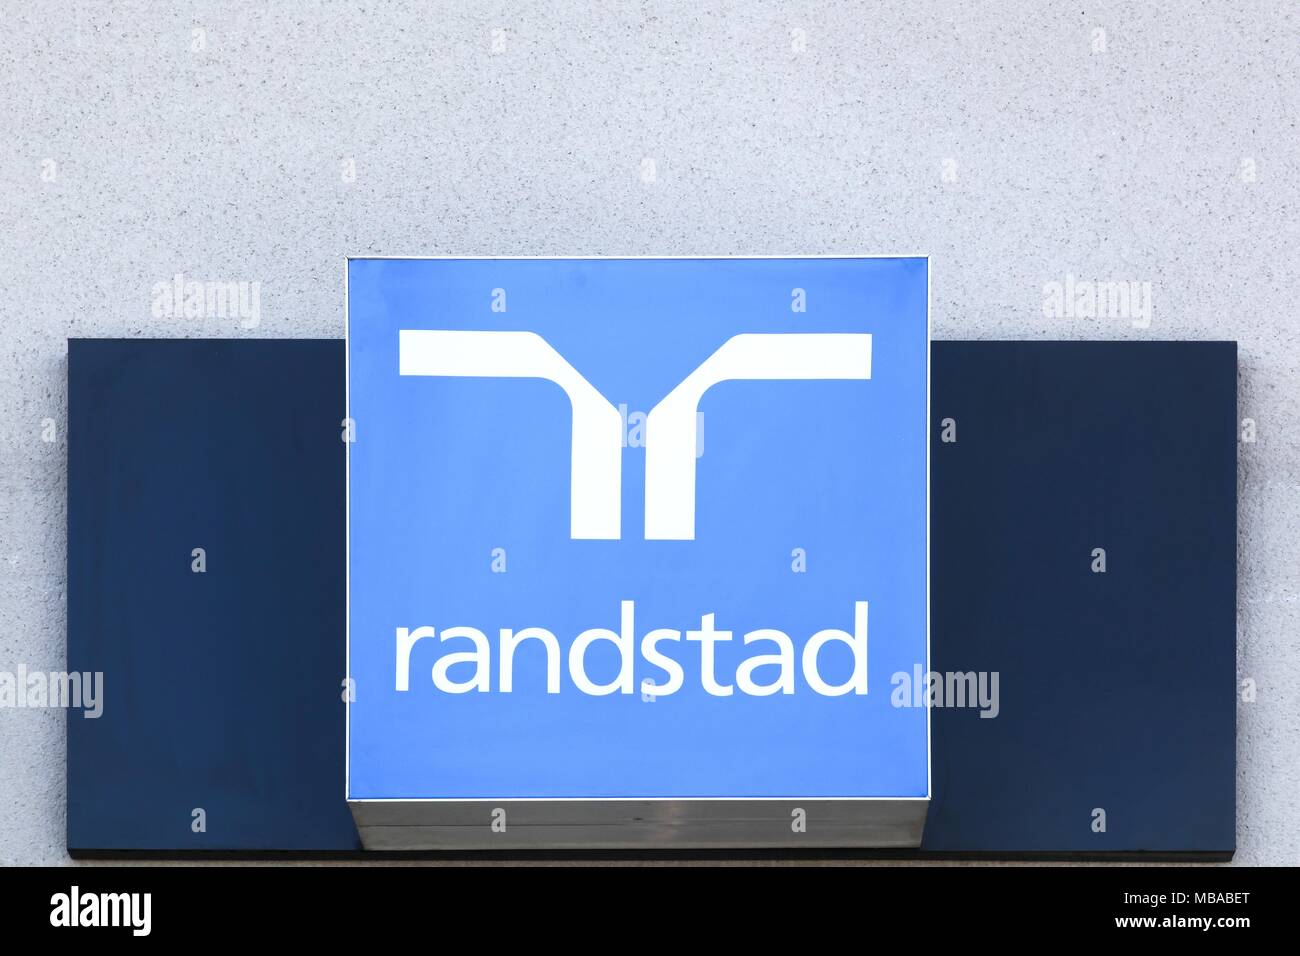 Villefranche, France - March 14, 2018: Randstad logo on a wall. Randstad is a Dutch multinational human resource consulting firm headquartered in Diem Stock Photo